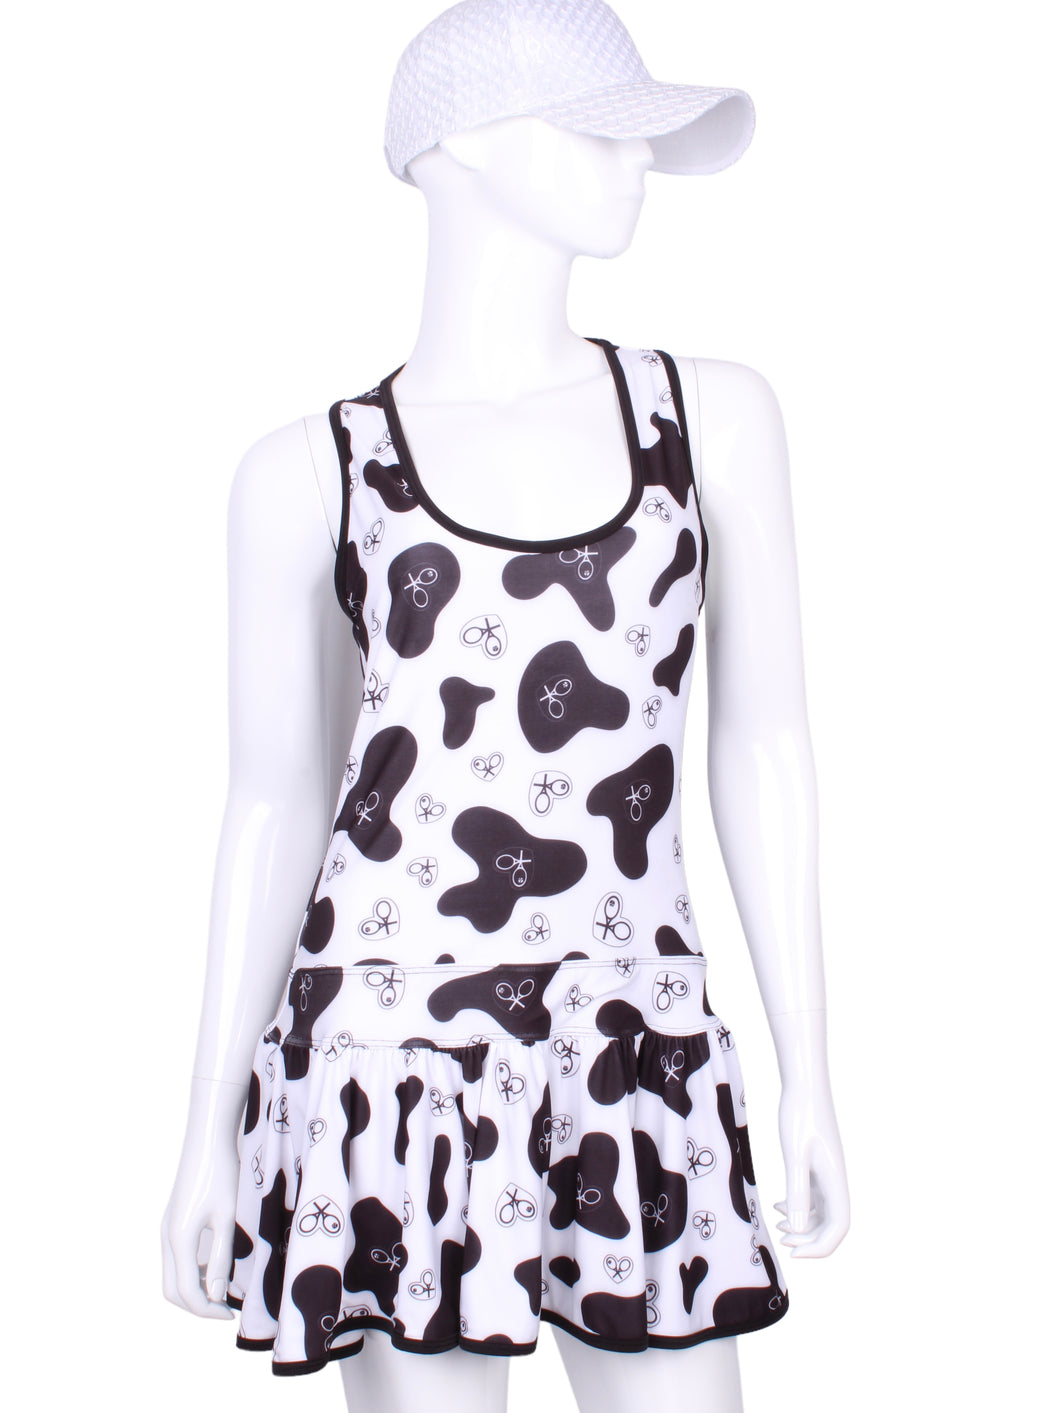 Tennis Dress Cow Print Black and White Court to Cocktails Tennis Dress Beverly Hills, CA 90210 Love Love Tennis Luxury Boutique and Pro Shop for Tennis Outfits for Women